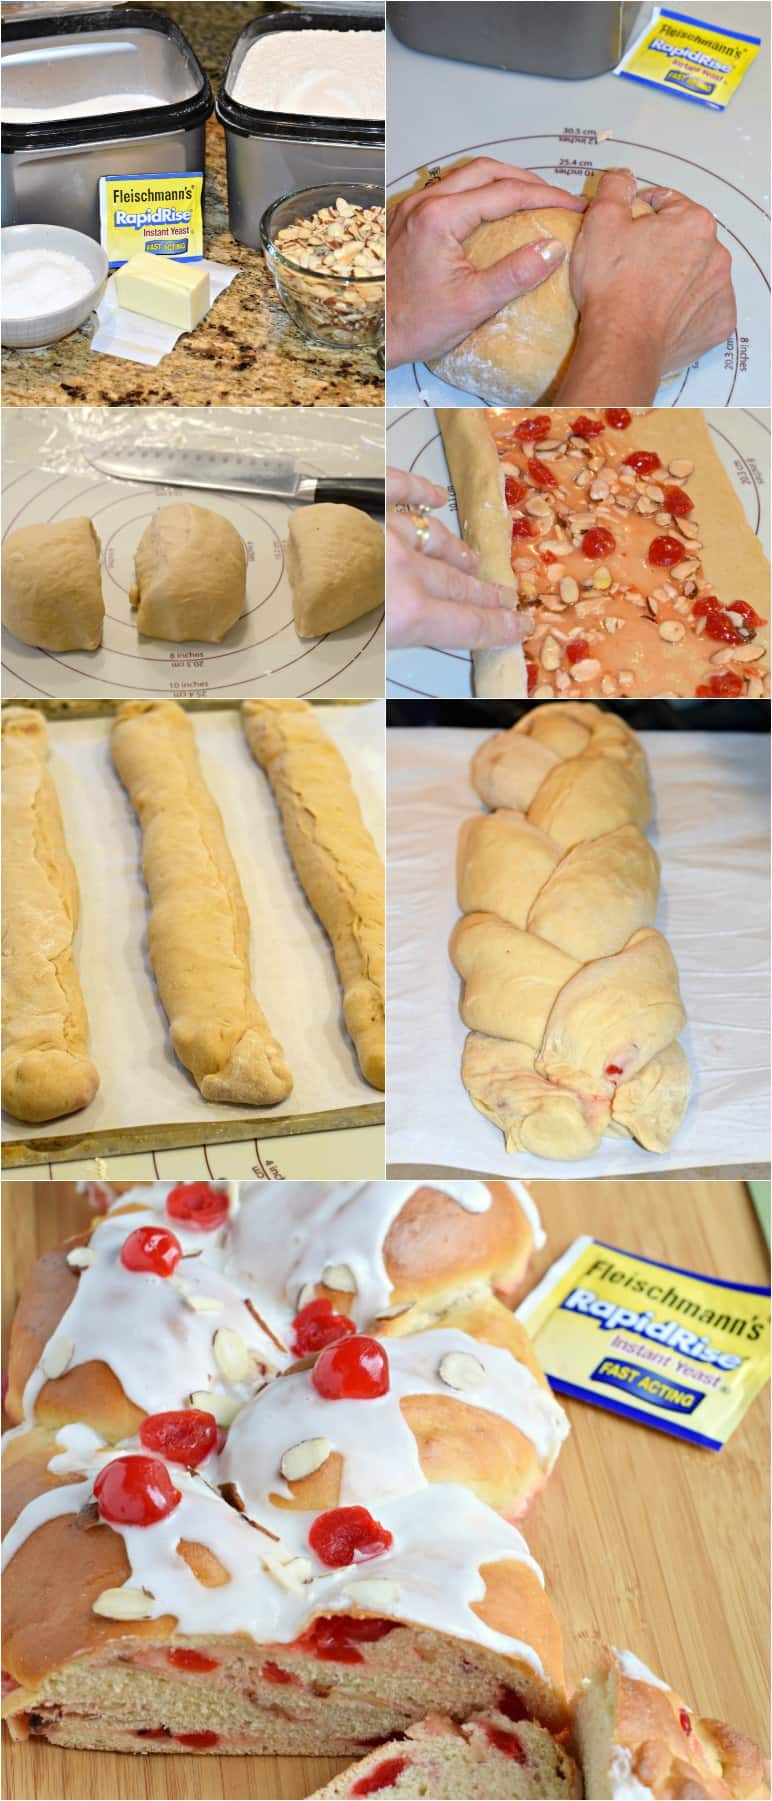 Step by step photos showing how to make cherry almond braid.